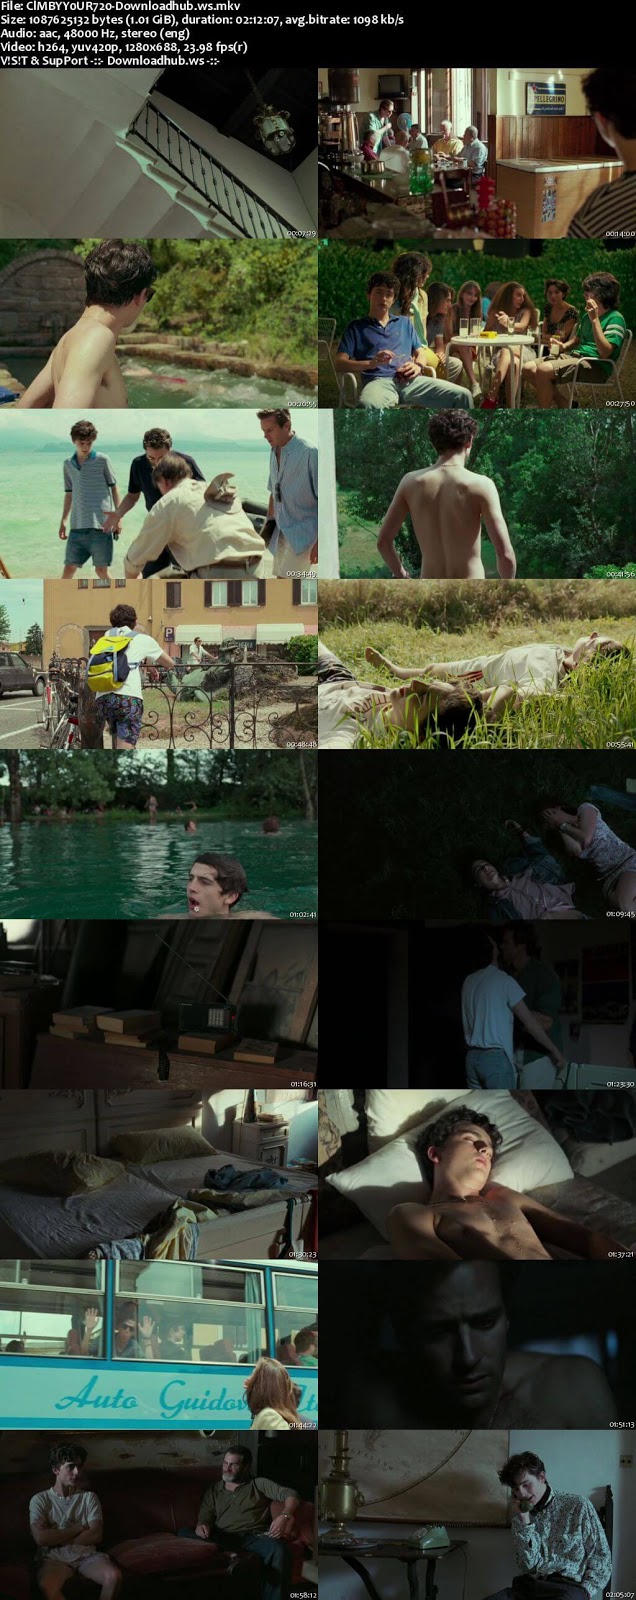 Call Me by Your Name 2017 English 720p Web-DL 1GB ESubs